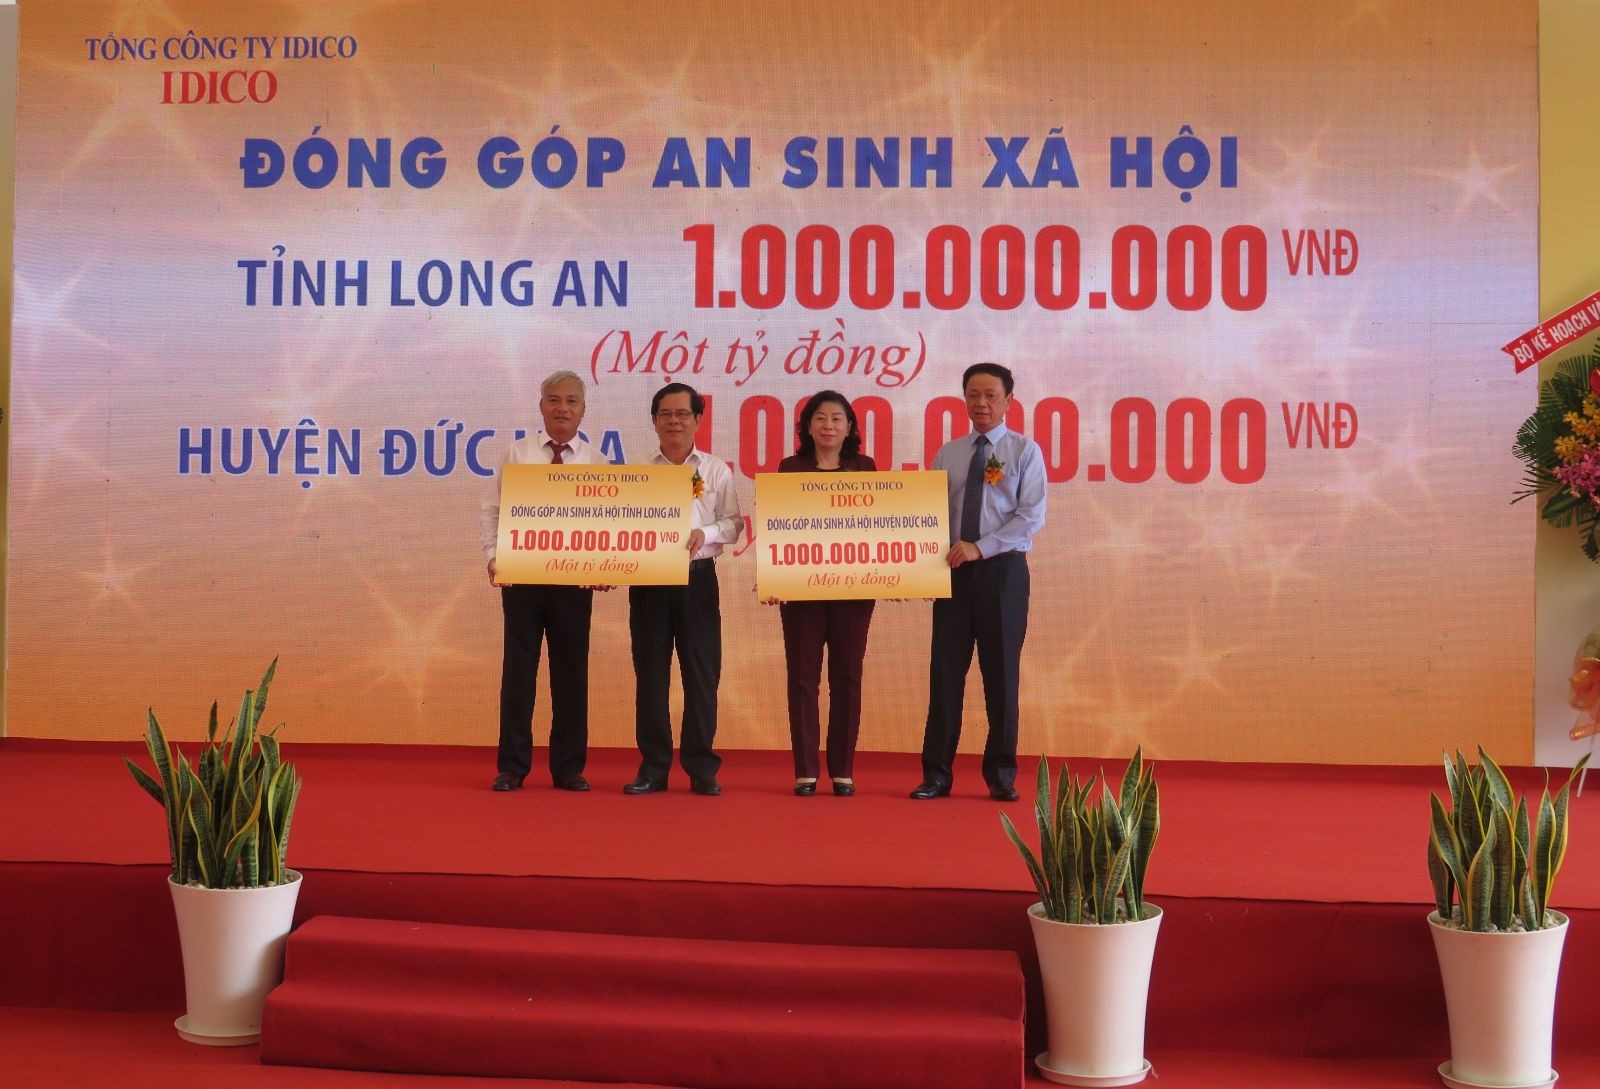 Infrastructure investors award 1 billion VND to social security fund of Long An province, 1 billion VND to Duc Hoa district